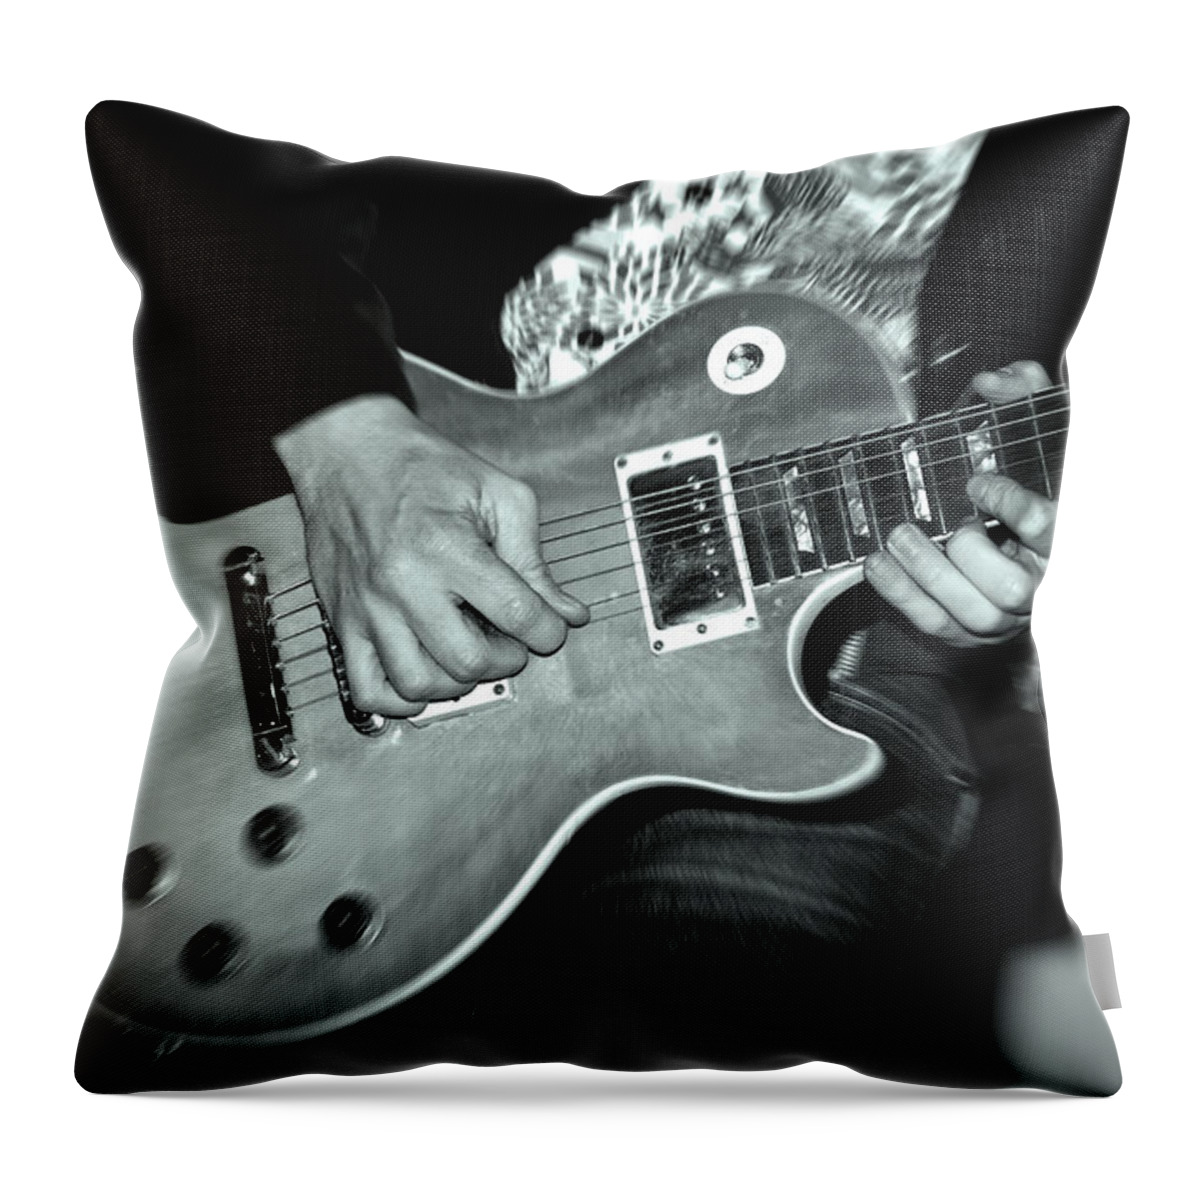 Rock On Throw Pillow featuring the photograph Rock On by Kamil Swiatek